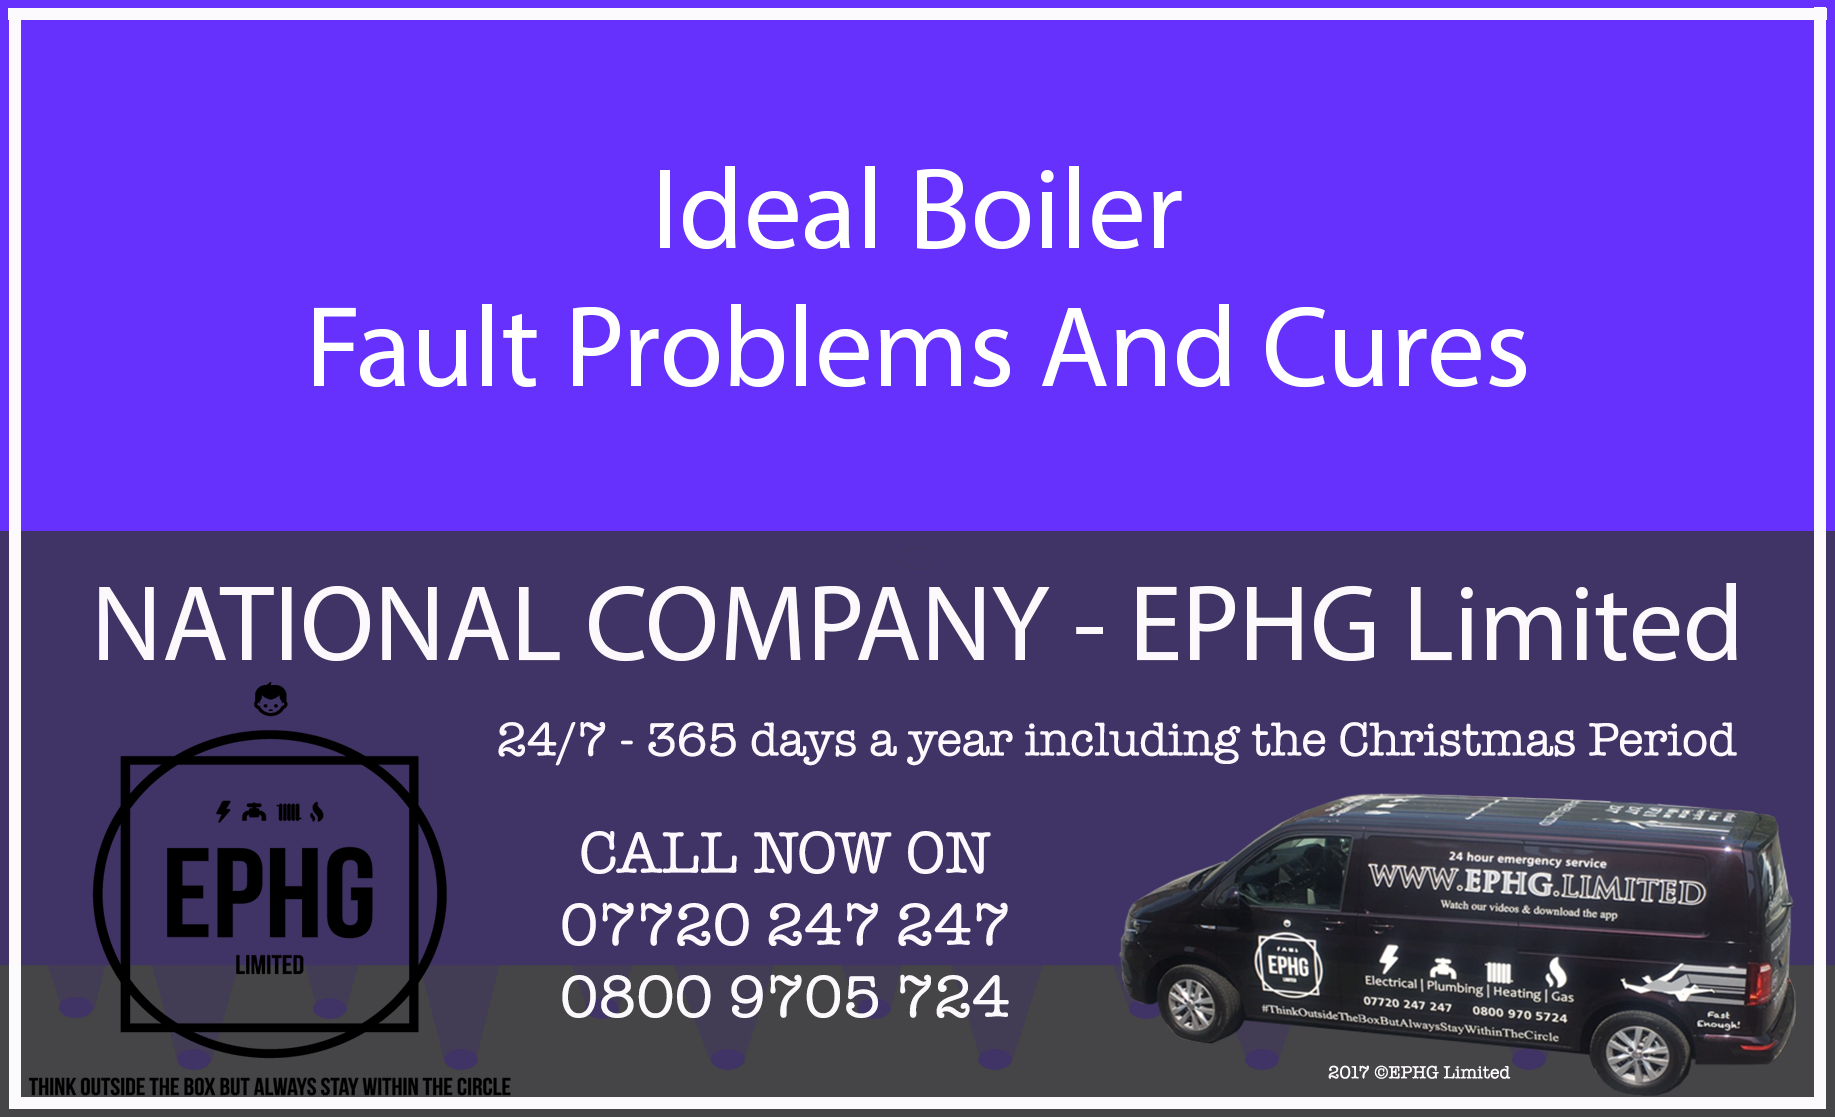 Ideal Boiler Problems And Cures